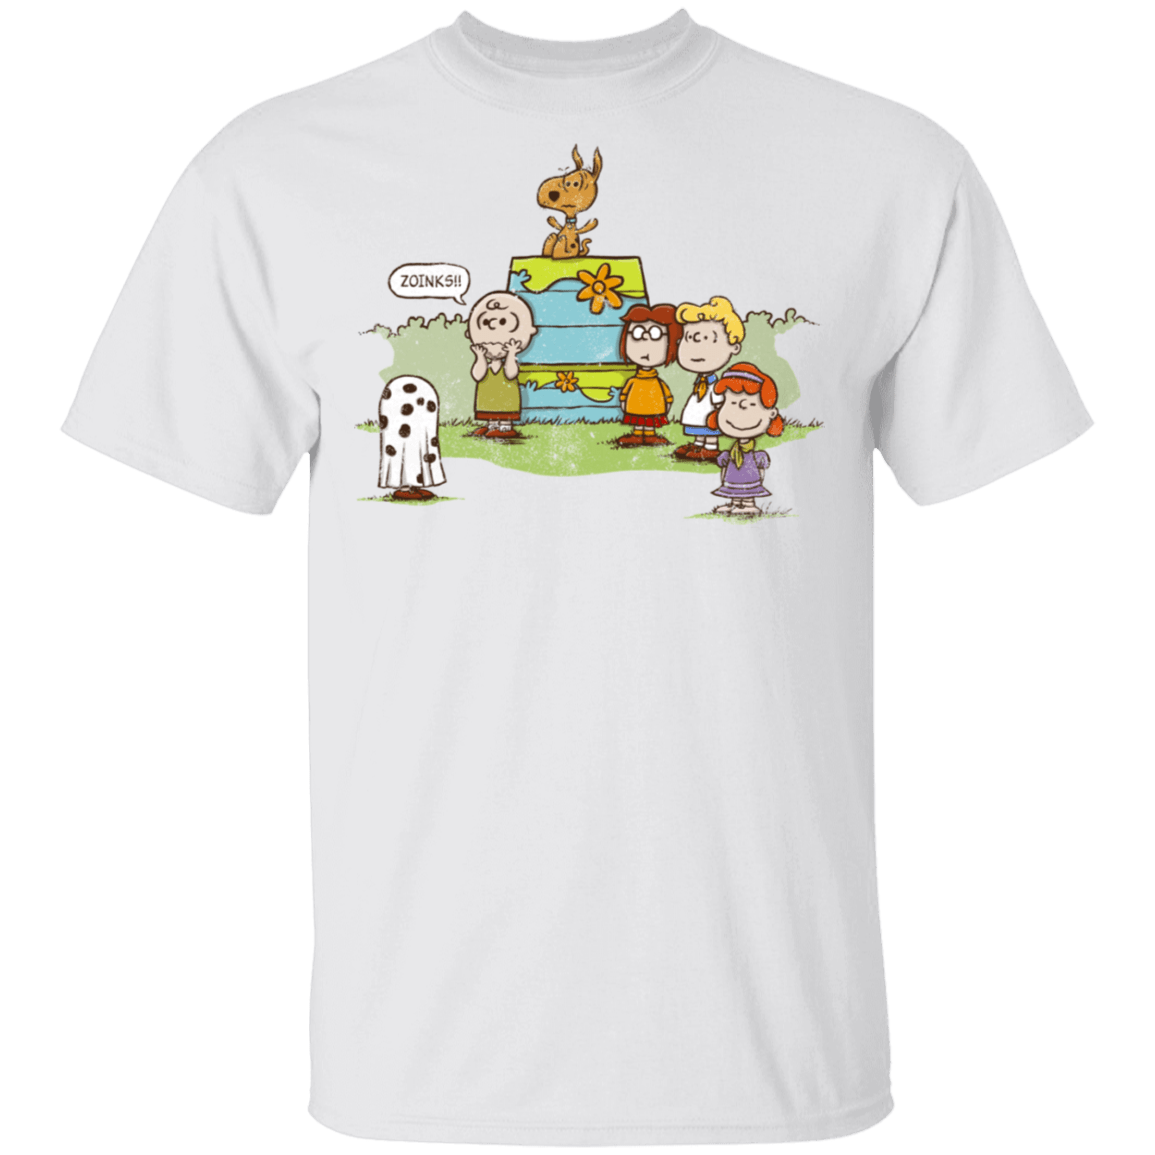 T-Shirts White / S Snoopy Scooby T-Shirt